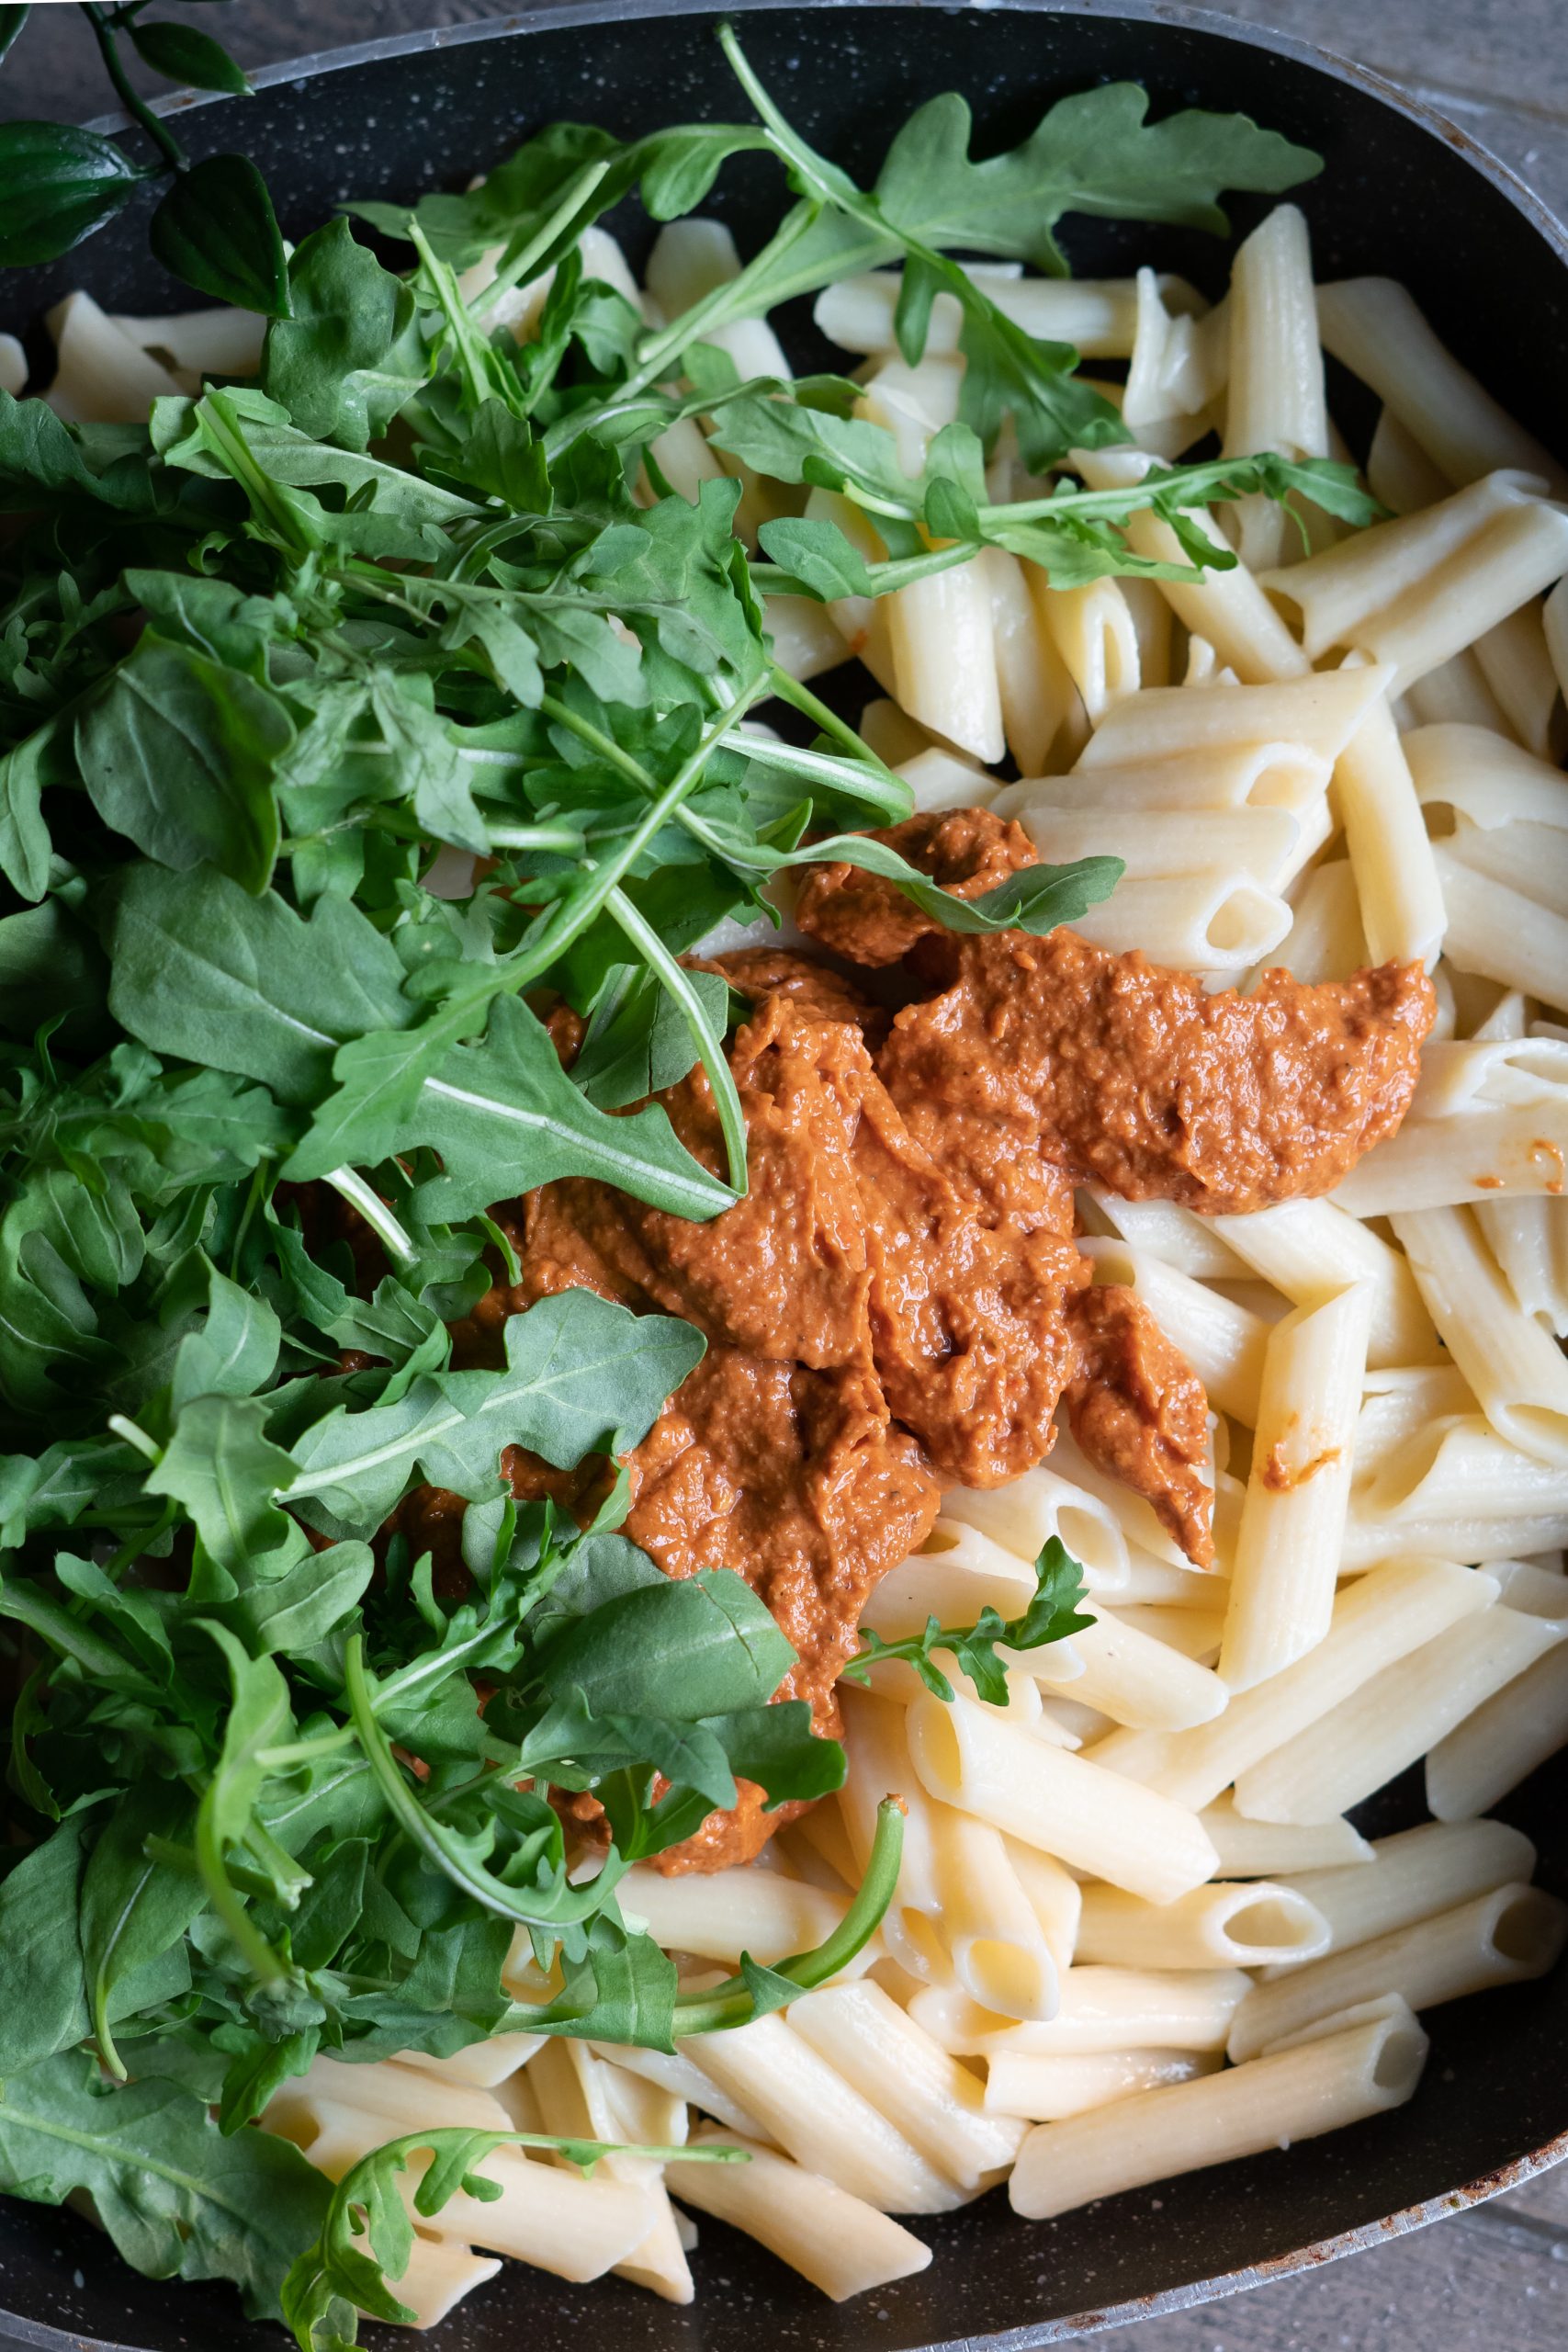 Fresh penne pasta, fresh arugula, and a freshly made batch of sauce in a pot, ready to be stirred together.